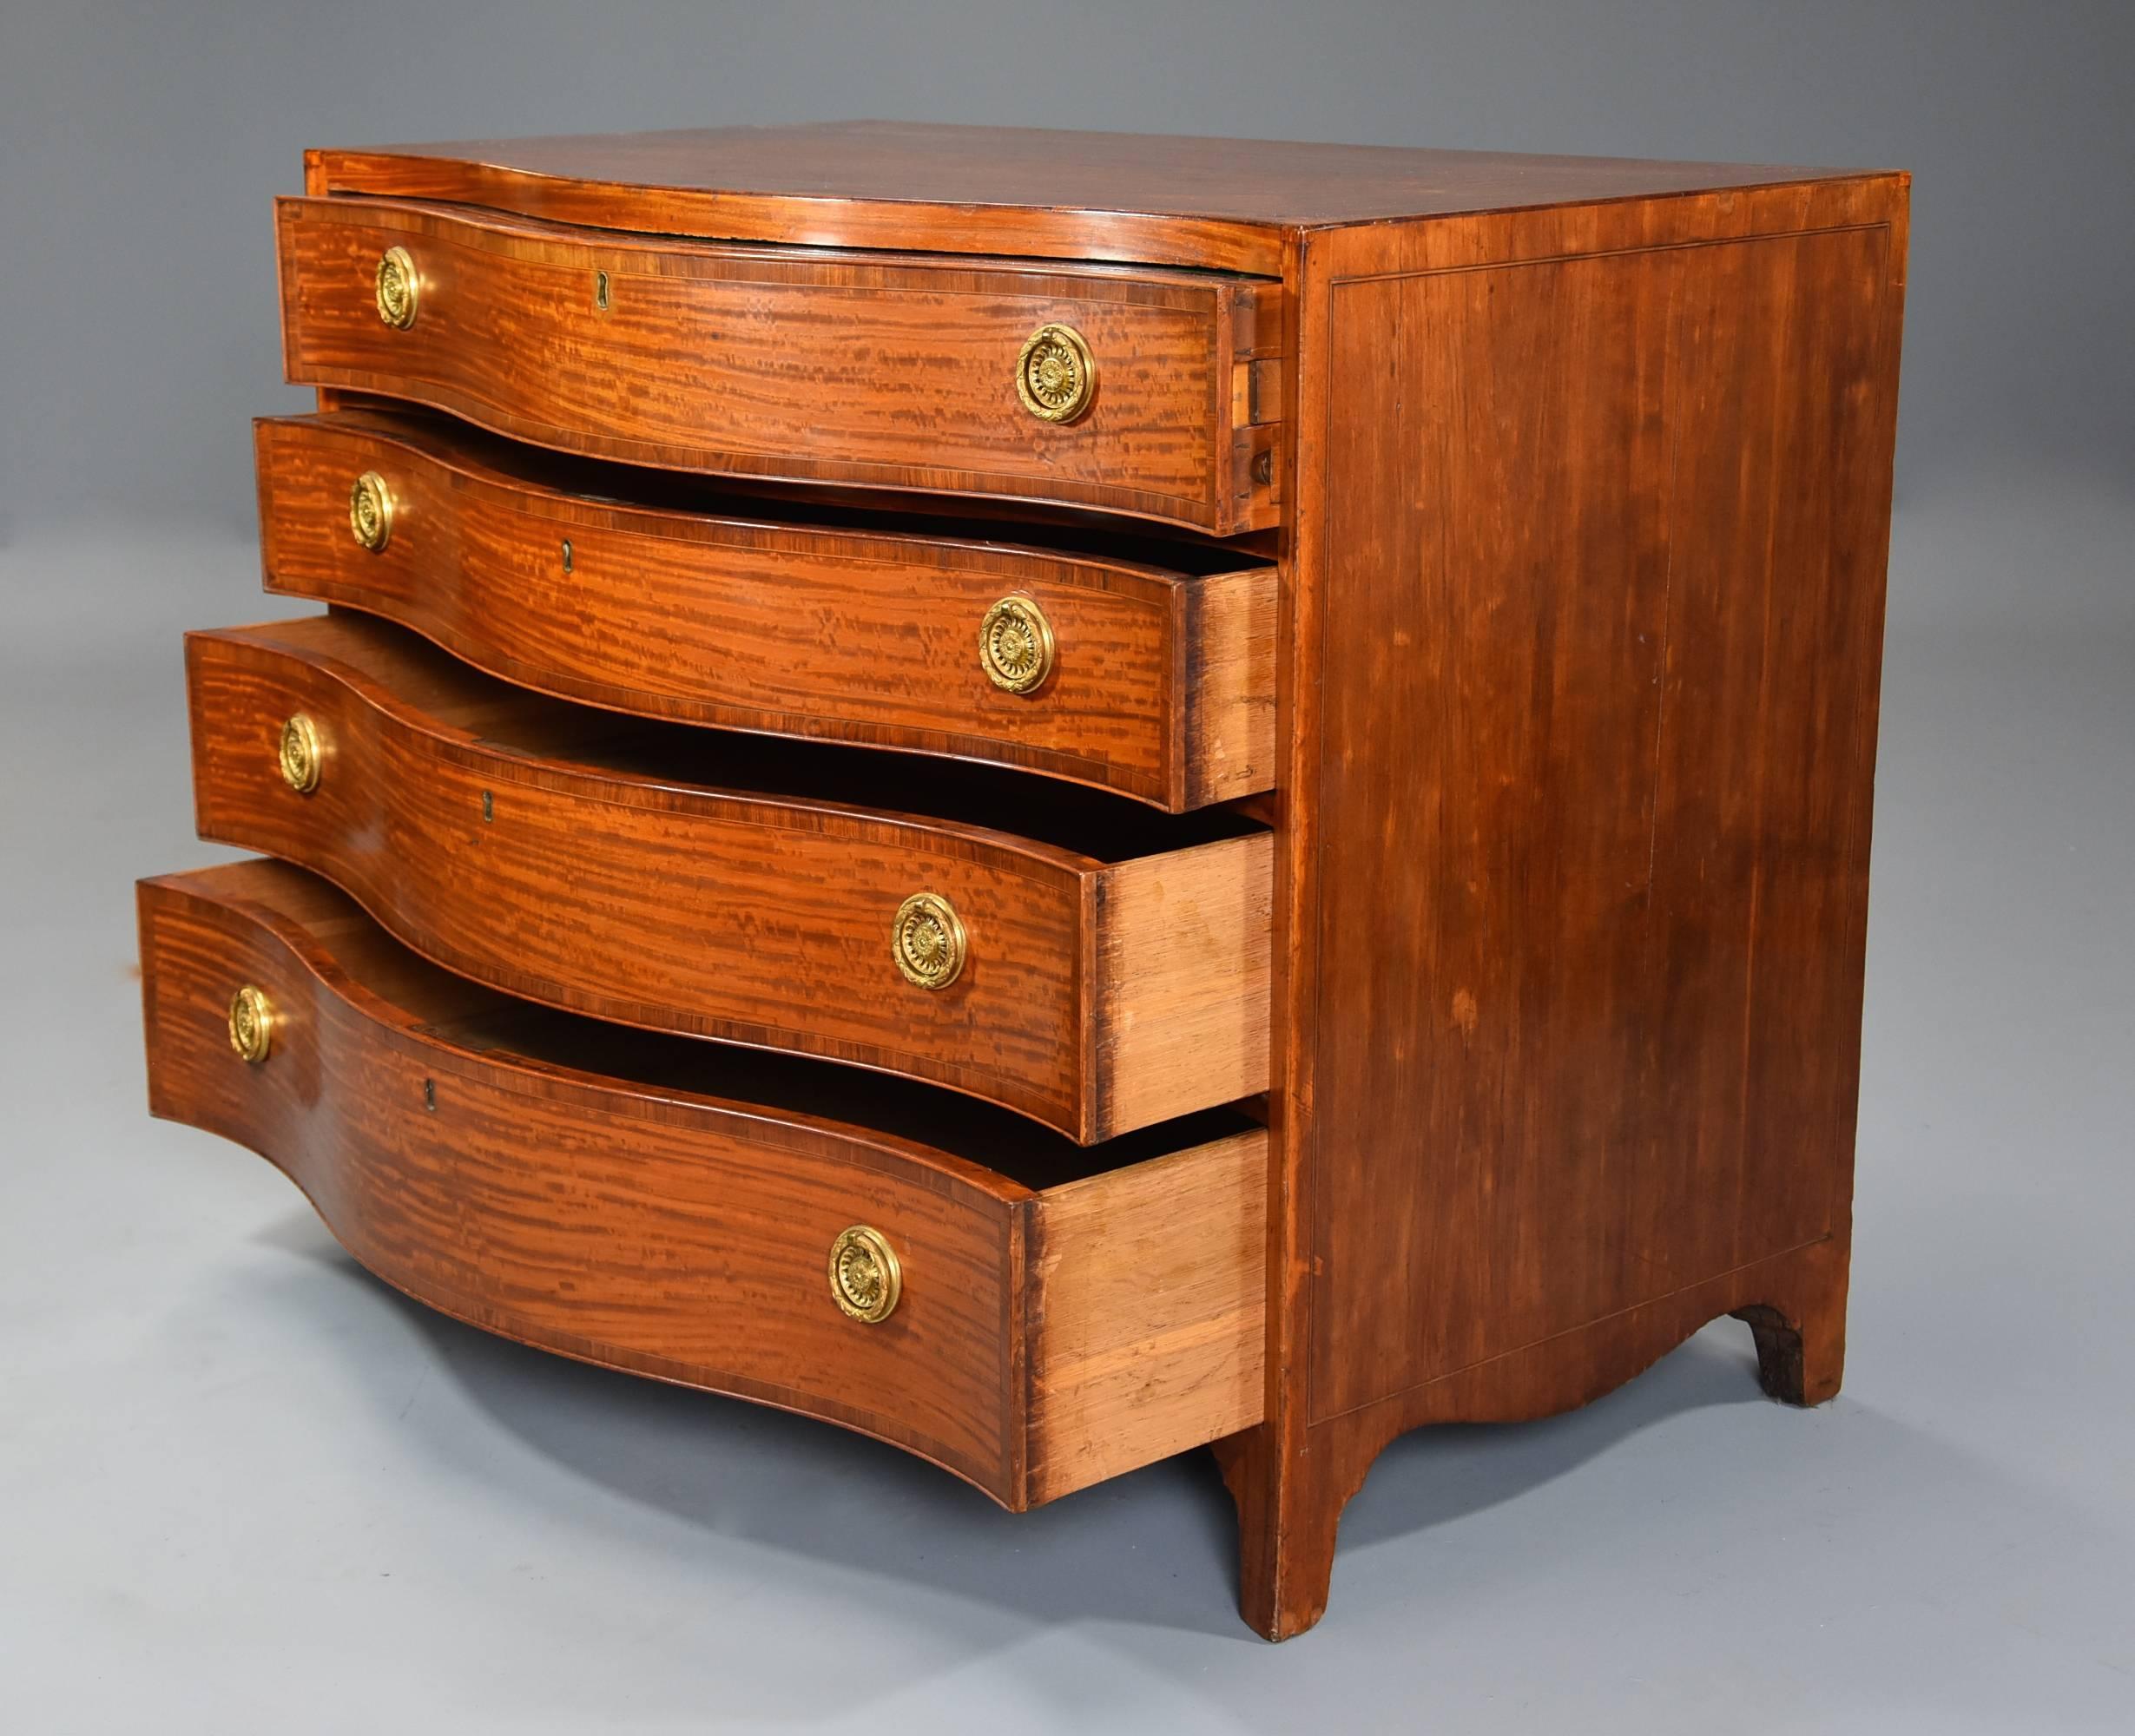 18th Century Superb Quality Serpentine Shaped Satinwood Gentleman's Dressing Chest For Sale